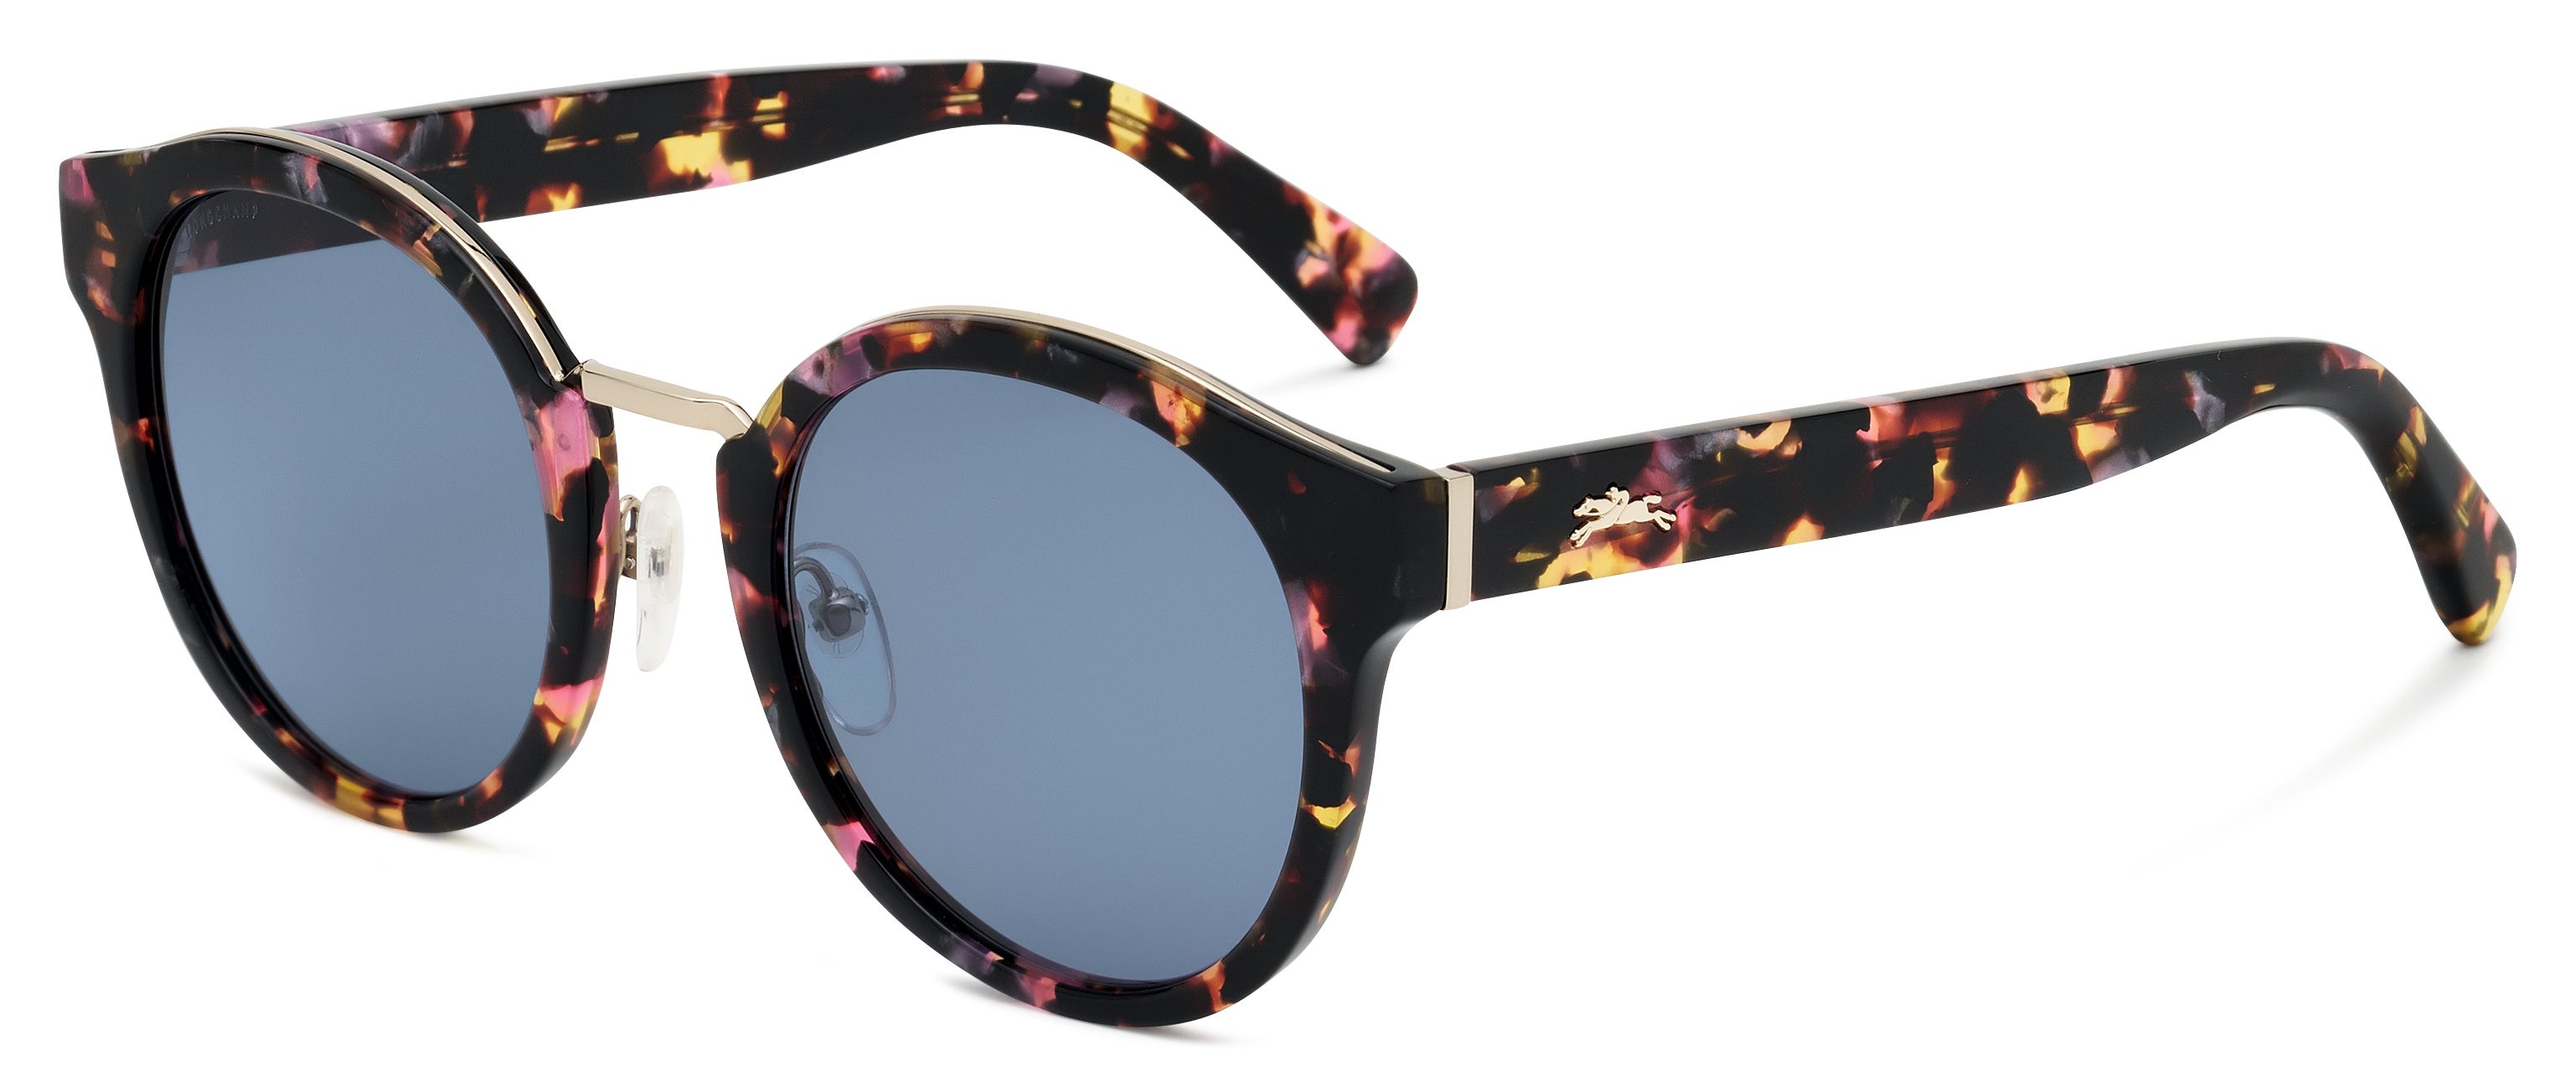 EYE SEE YOU. These specs are cool, classic, and colorful 